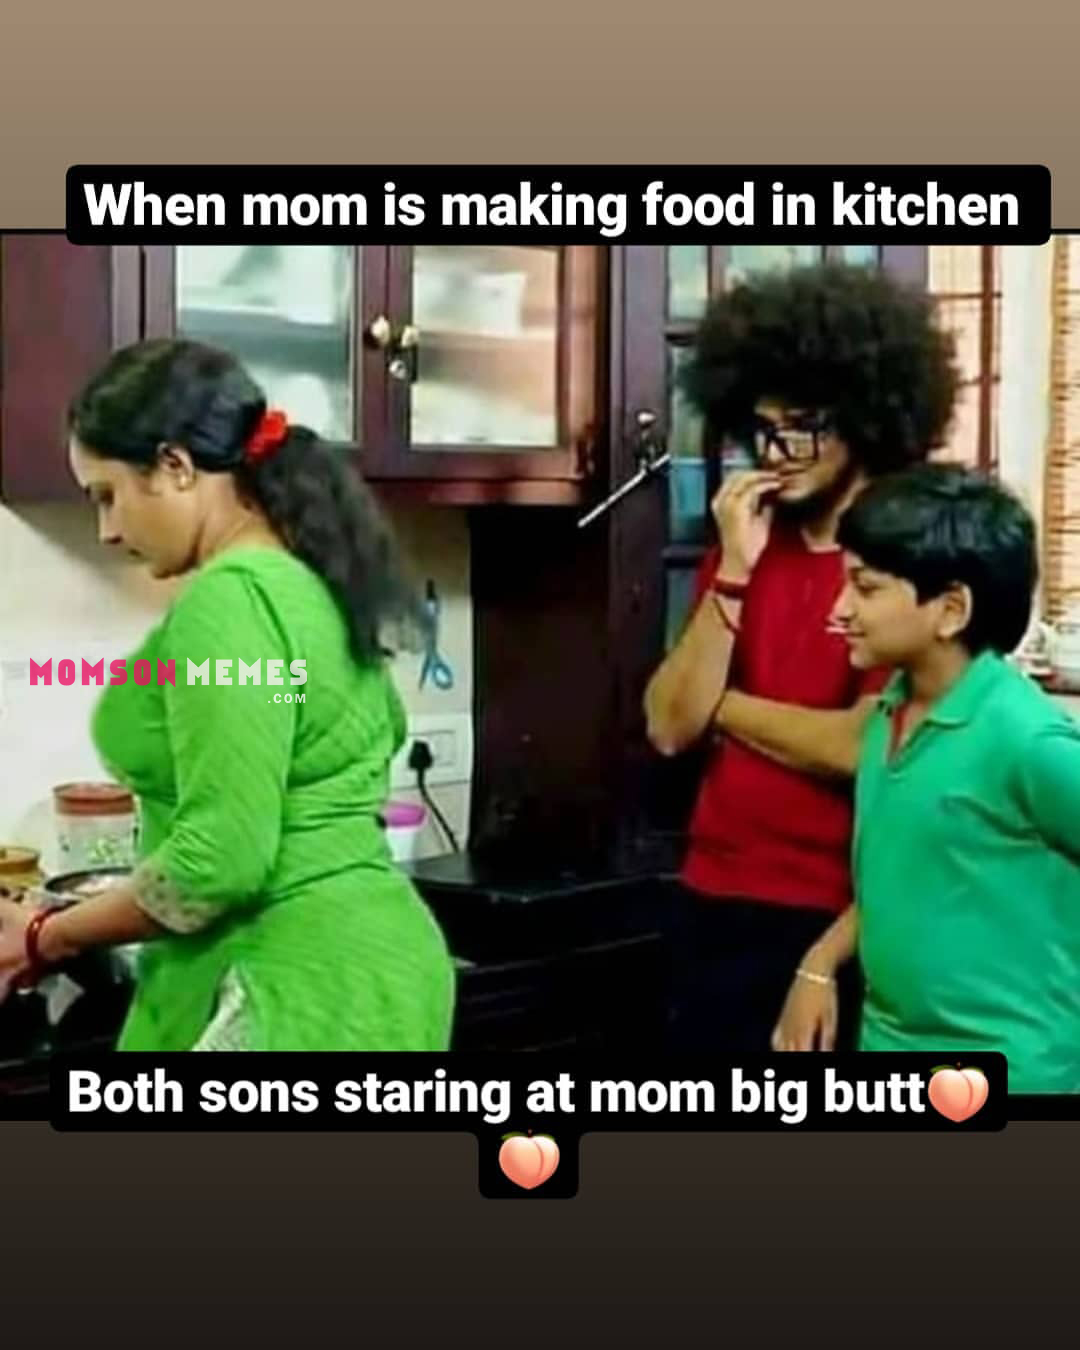 When mom is making food in kitchen!